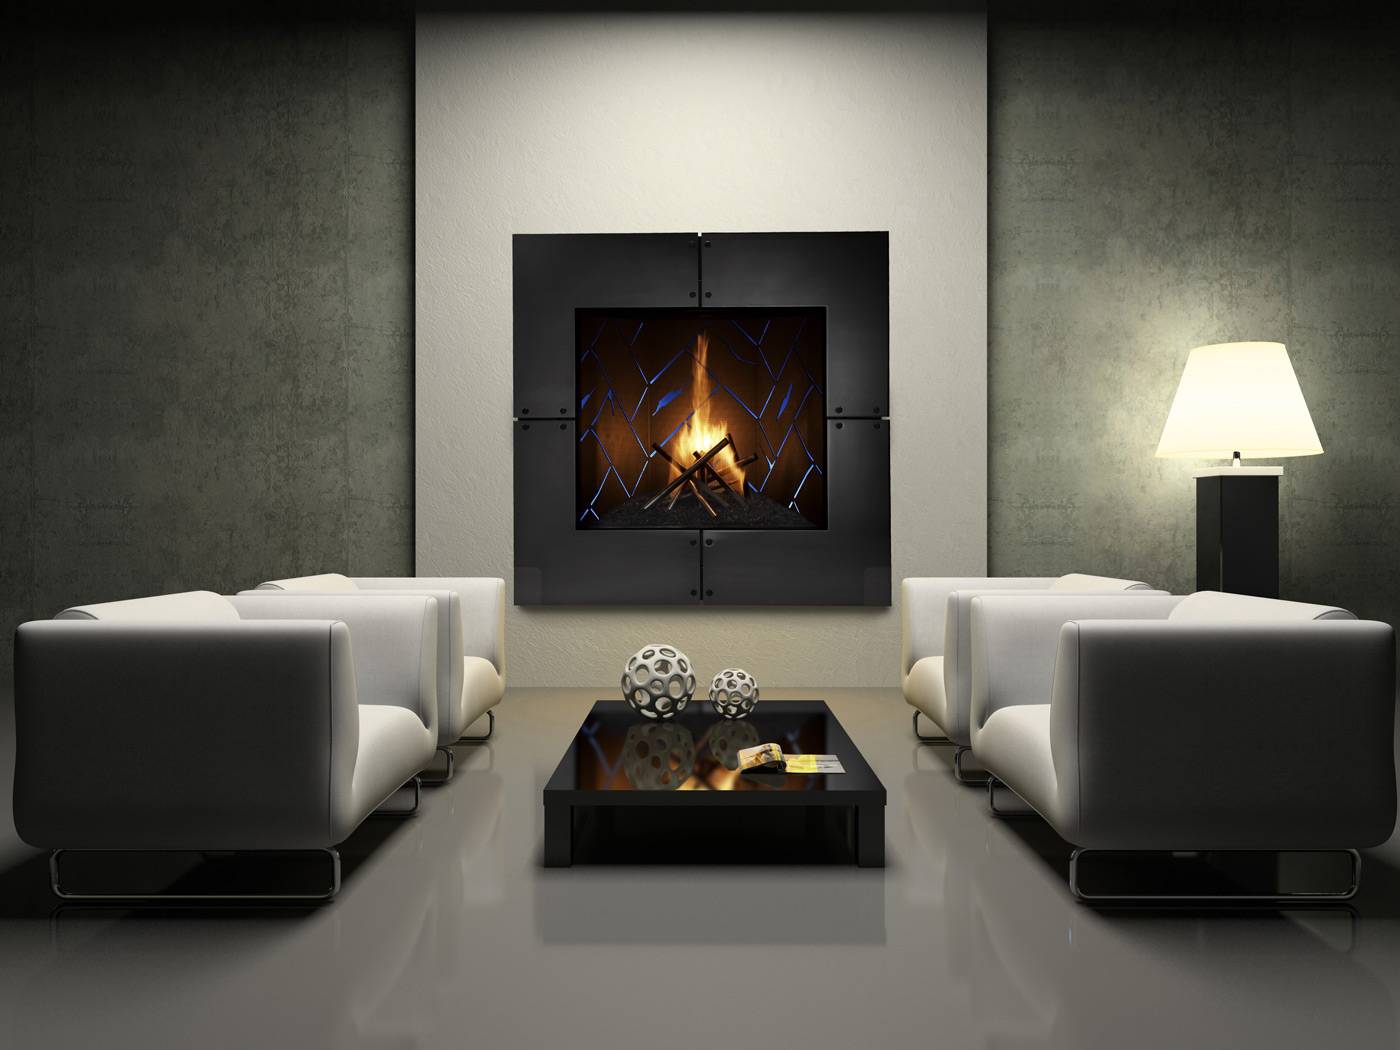 Contemporary | Hot Tubs, Fireplaces, Patio Furniture - Heat 'N Sweep